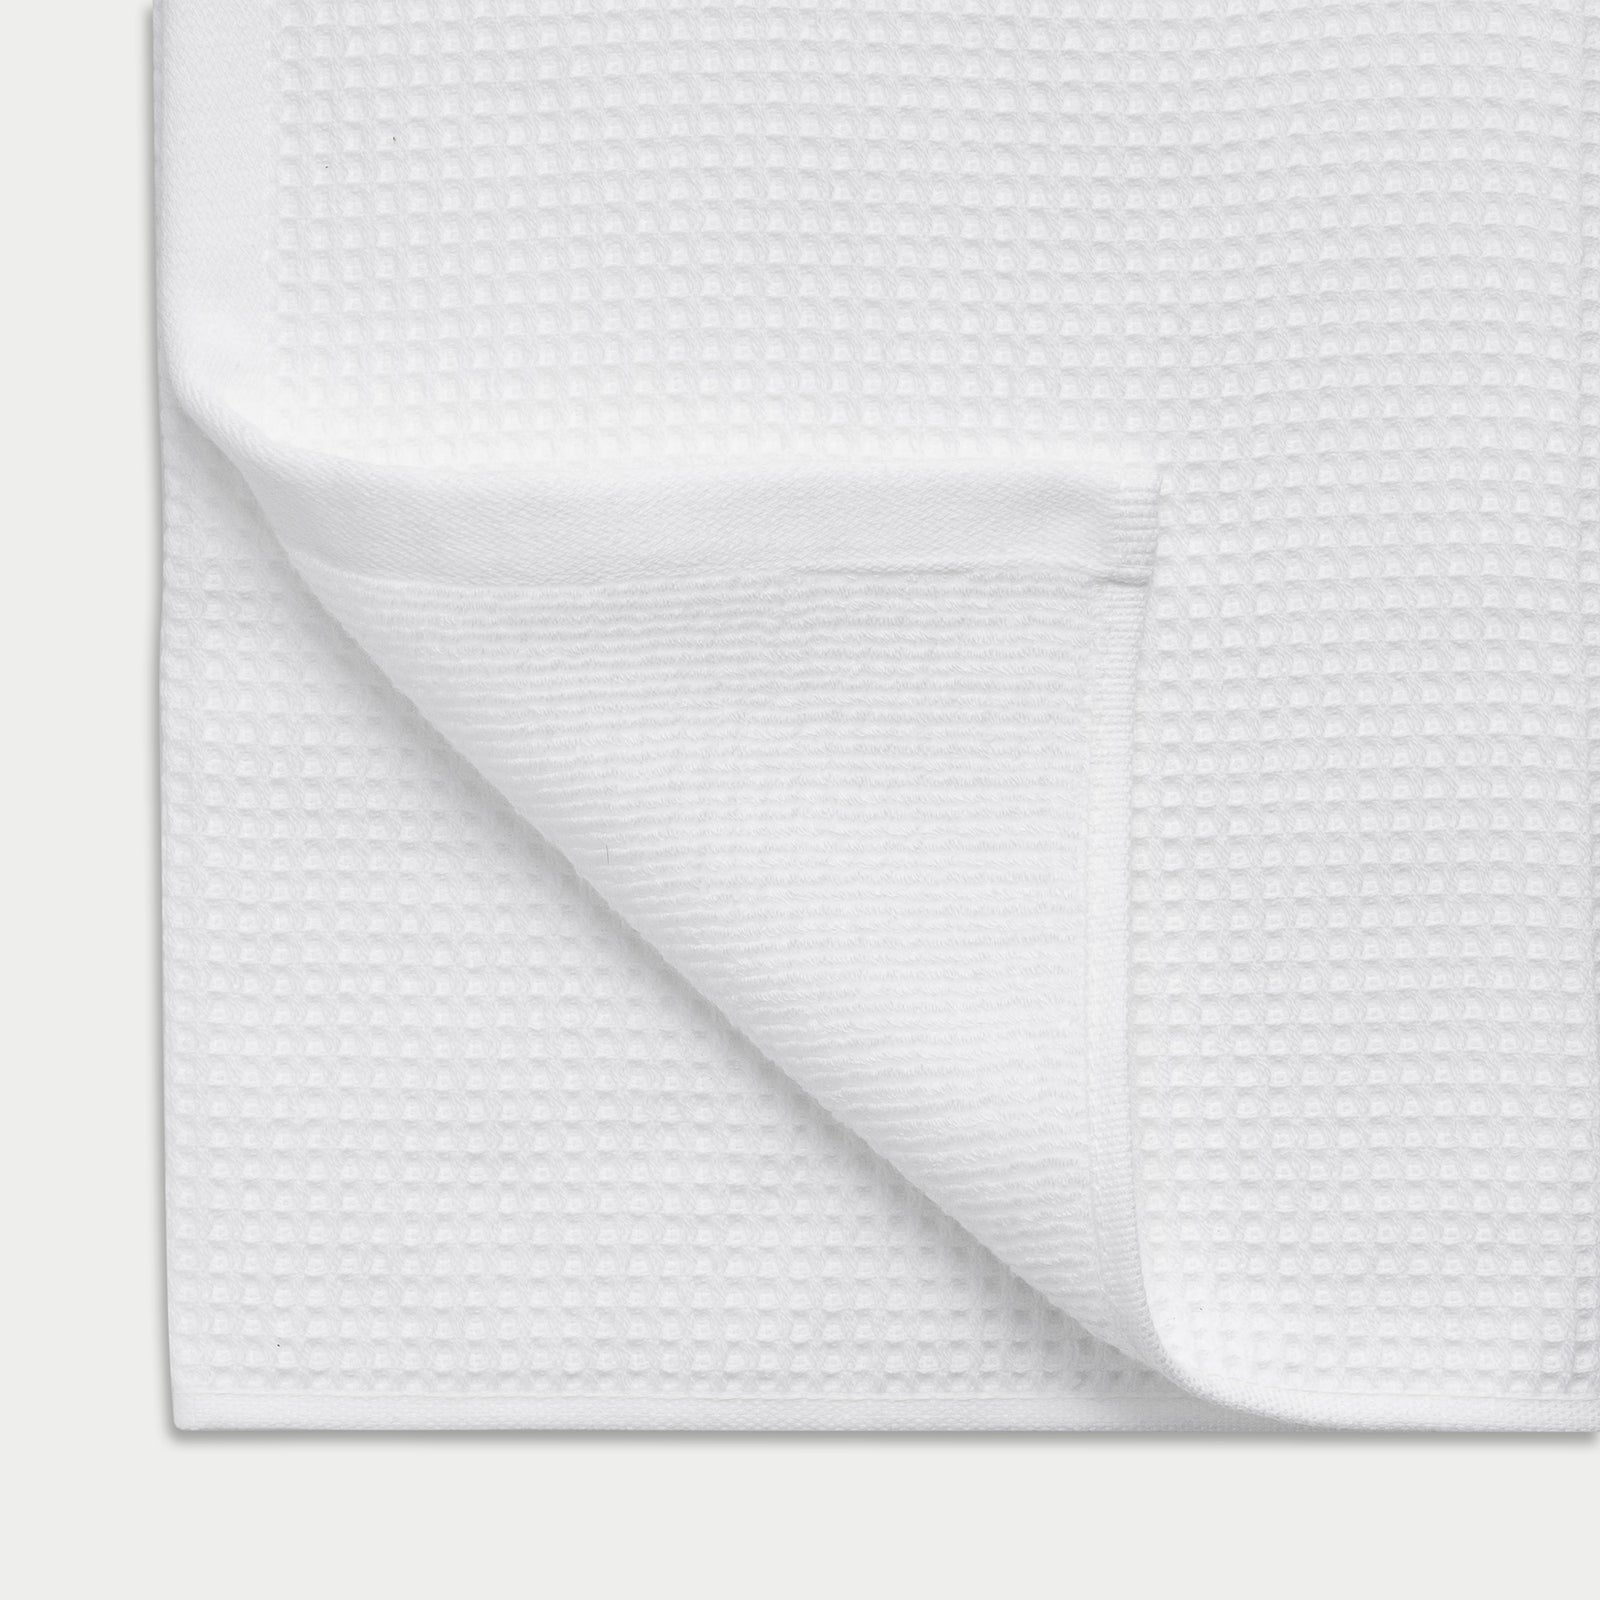 White Waffle Hand Towel resting flat on a white background. The corner is folded so that both sides of the towel can be seen. 